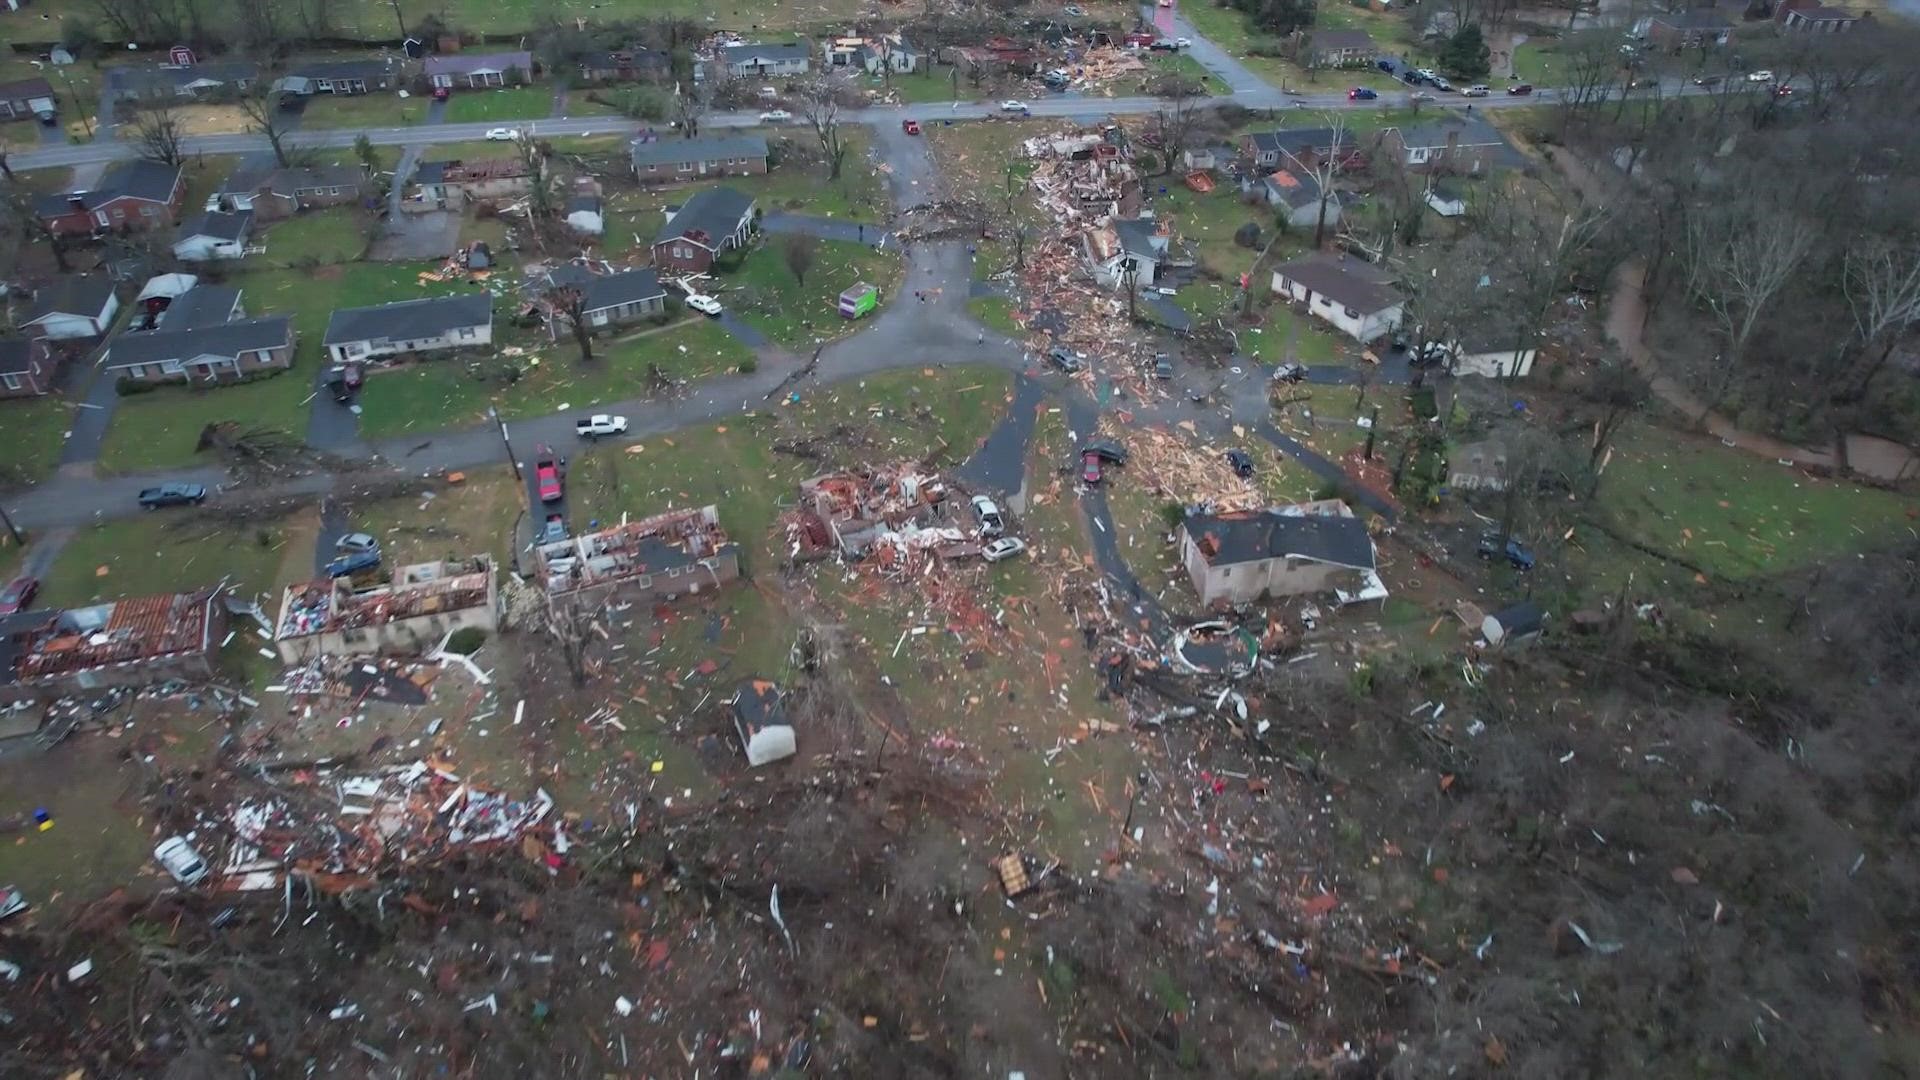 Drone video shows an aerial view of tornado damage in Bowling Green, Kentucky.